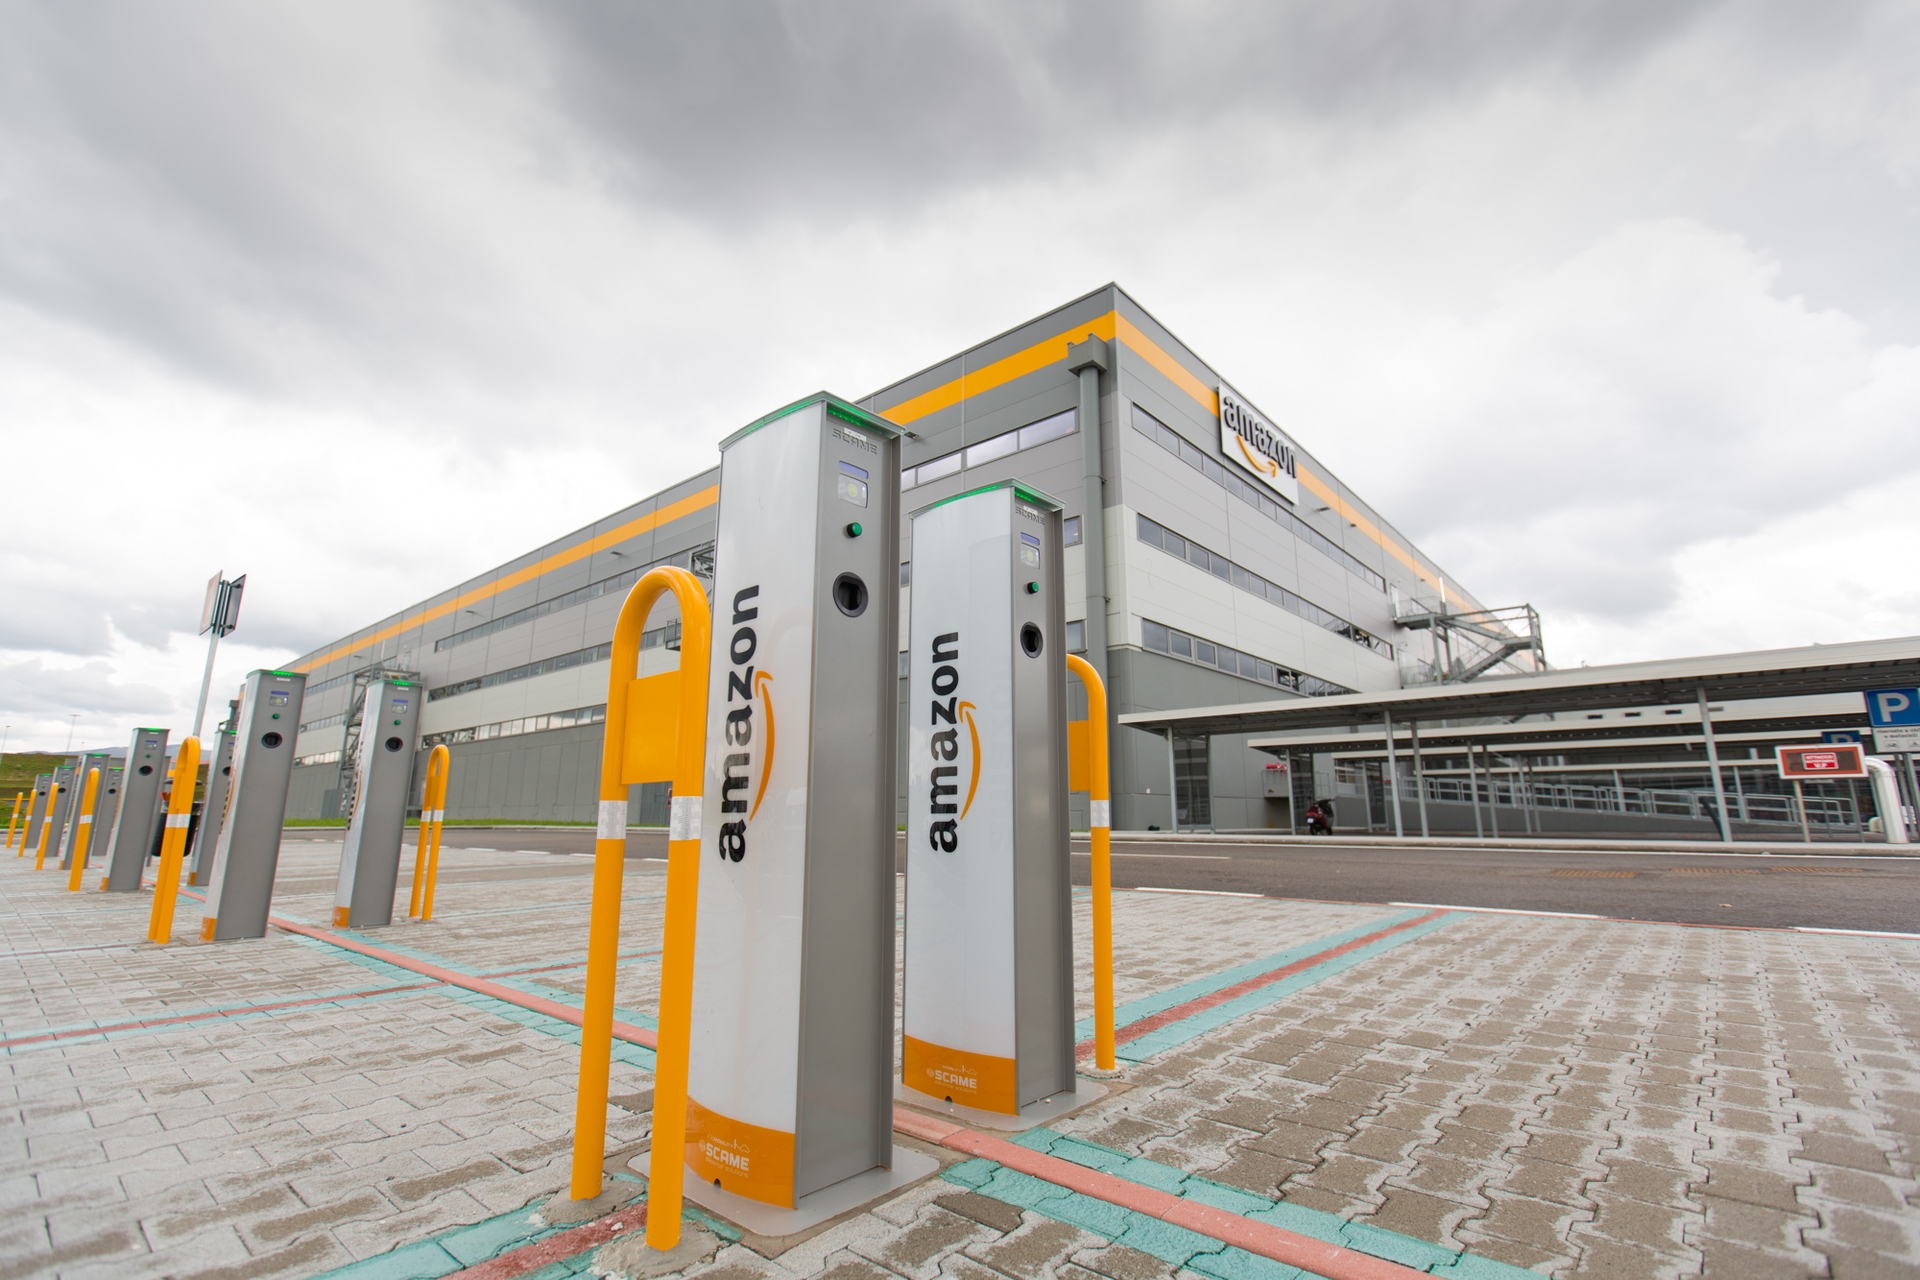 An electric car charging station outside of an Amazon fulfillment center in Italy.